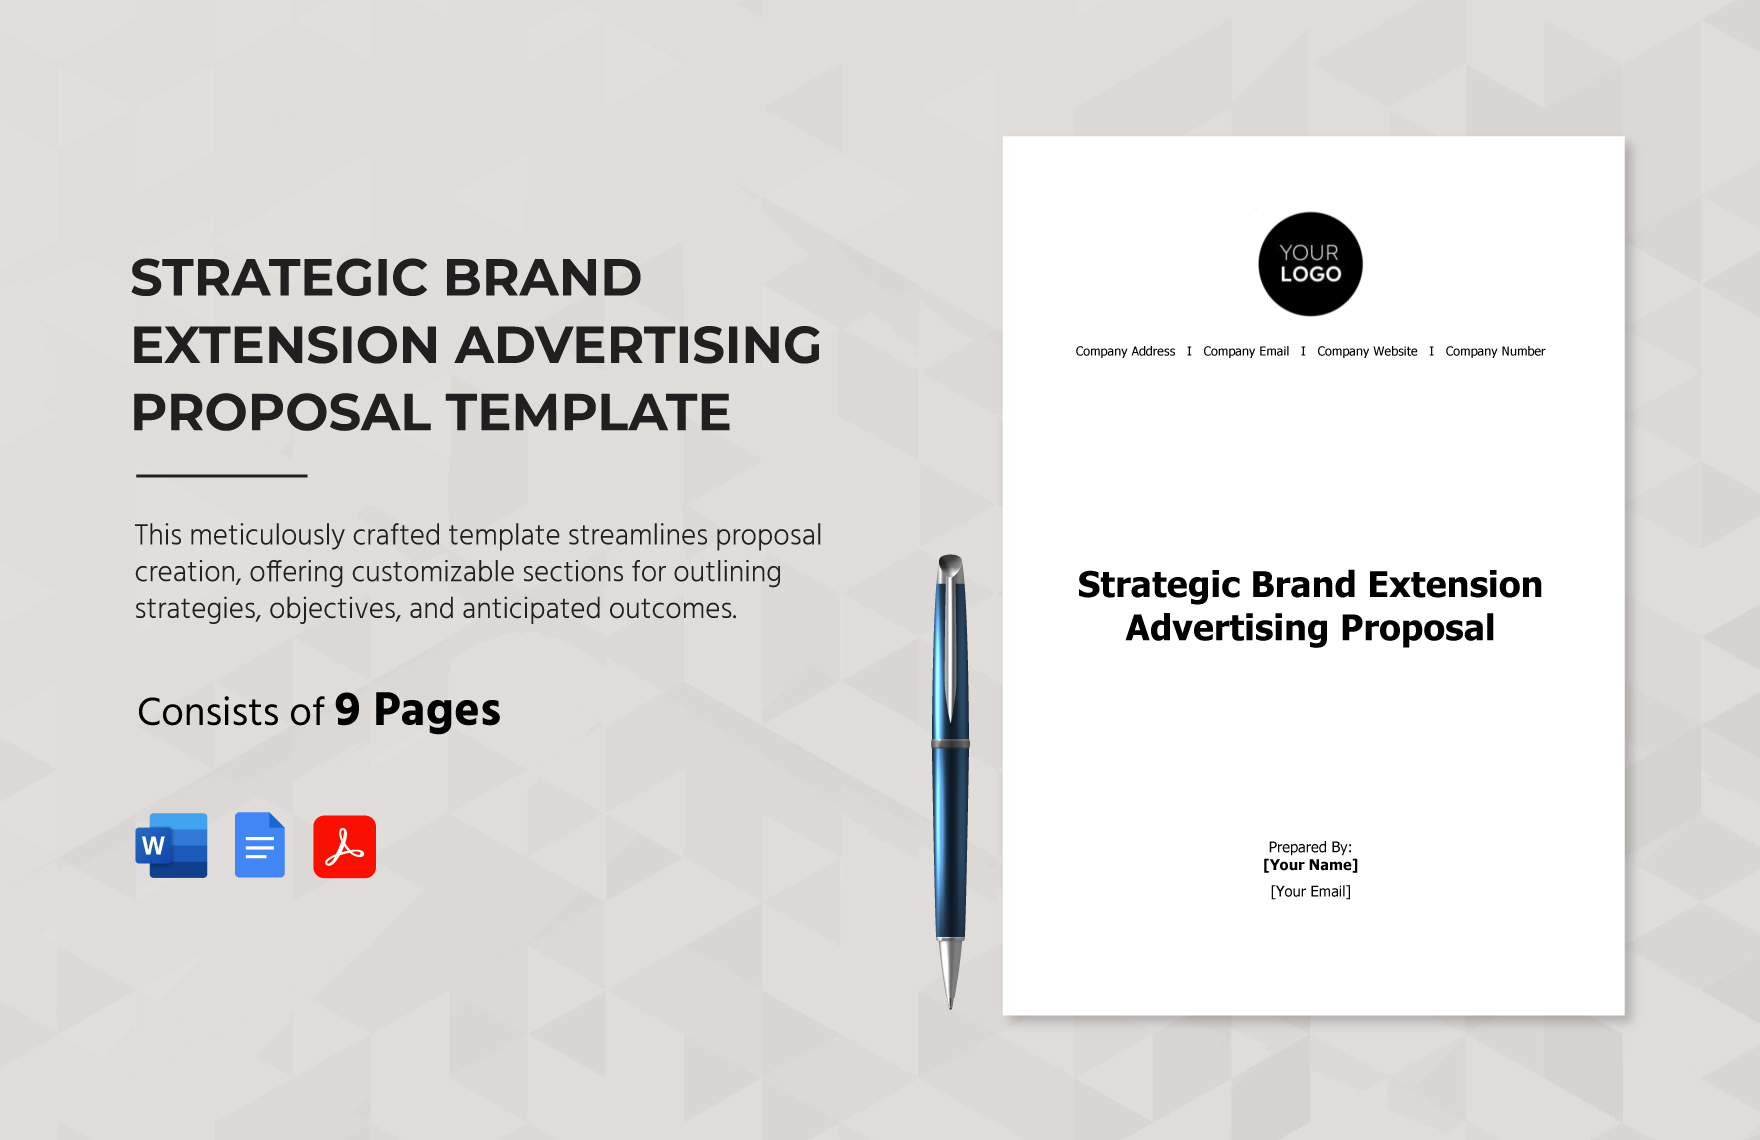 Strategic Brand Extension Advertising Proposal Template in Word, Google Docs, PDF